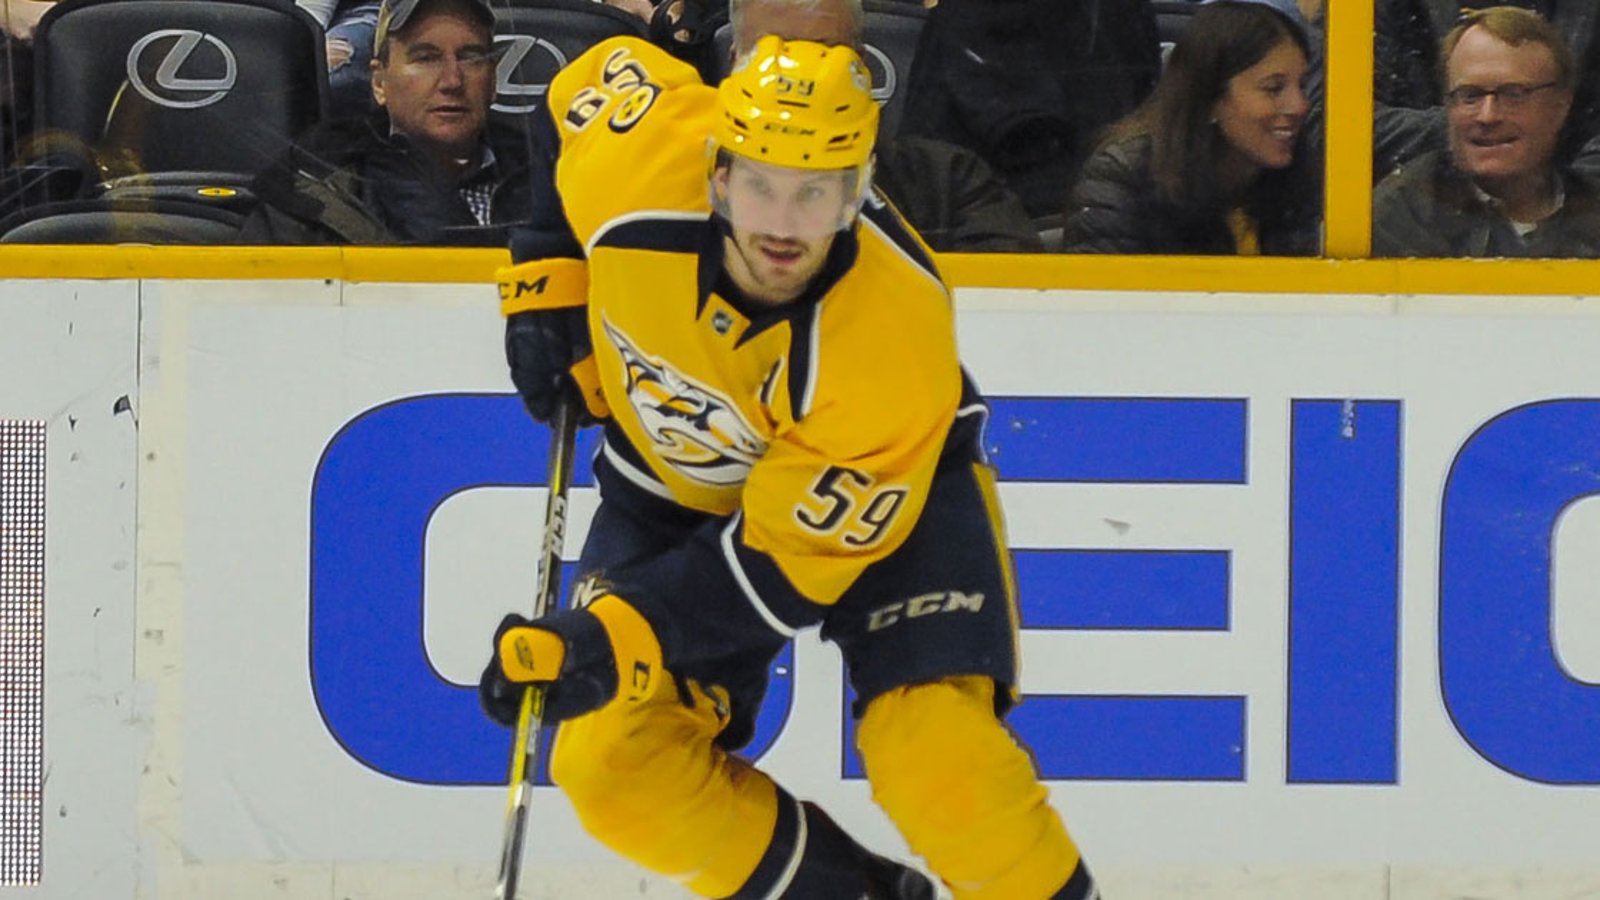 Report: Josi and Sissons are “game-time decisions”